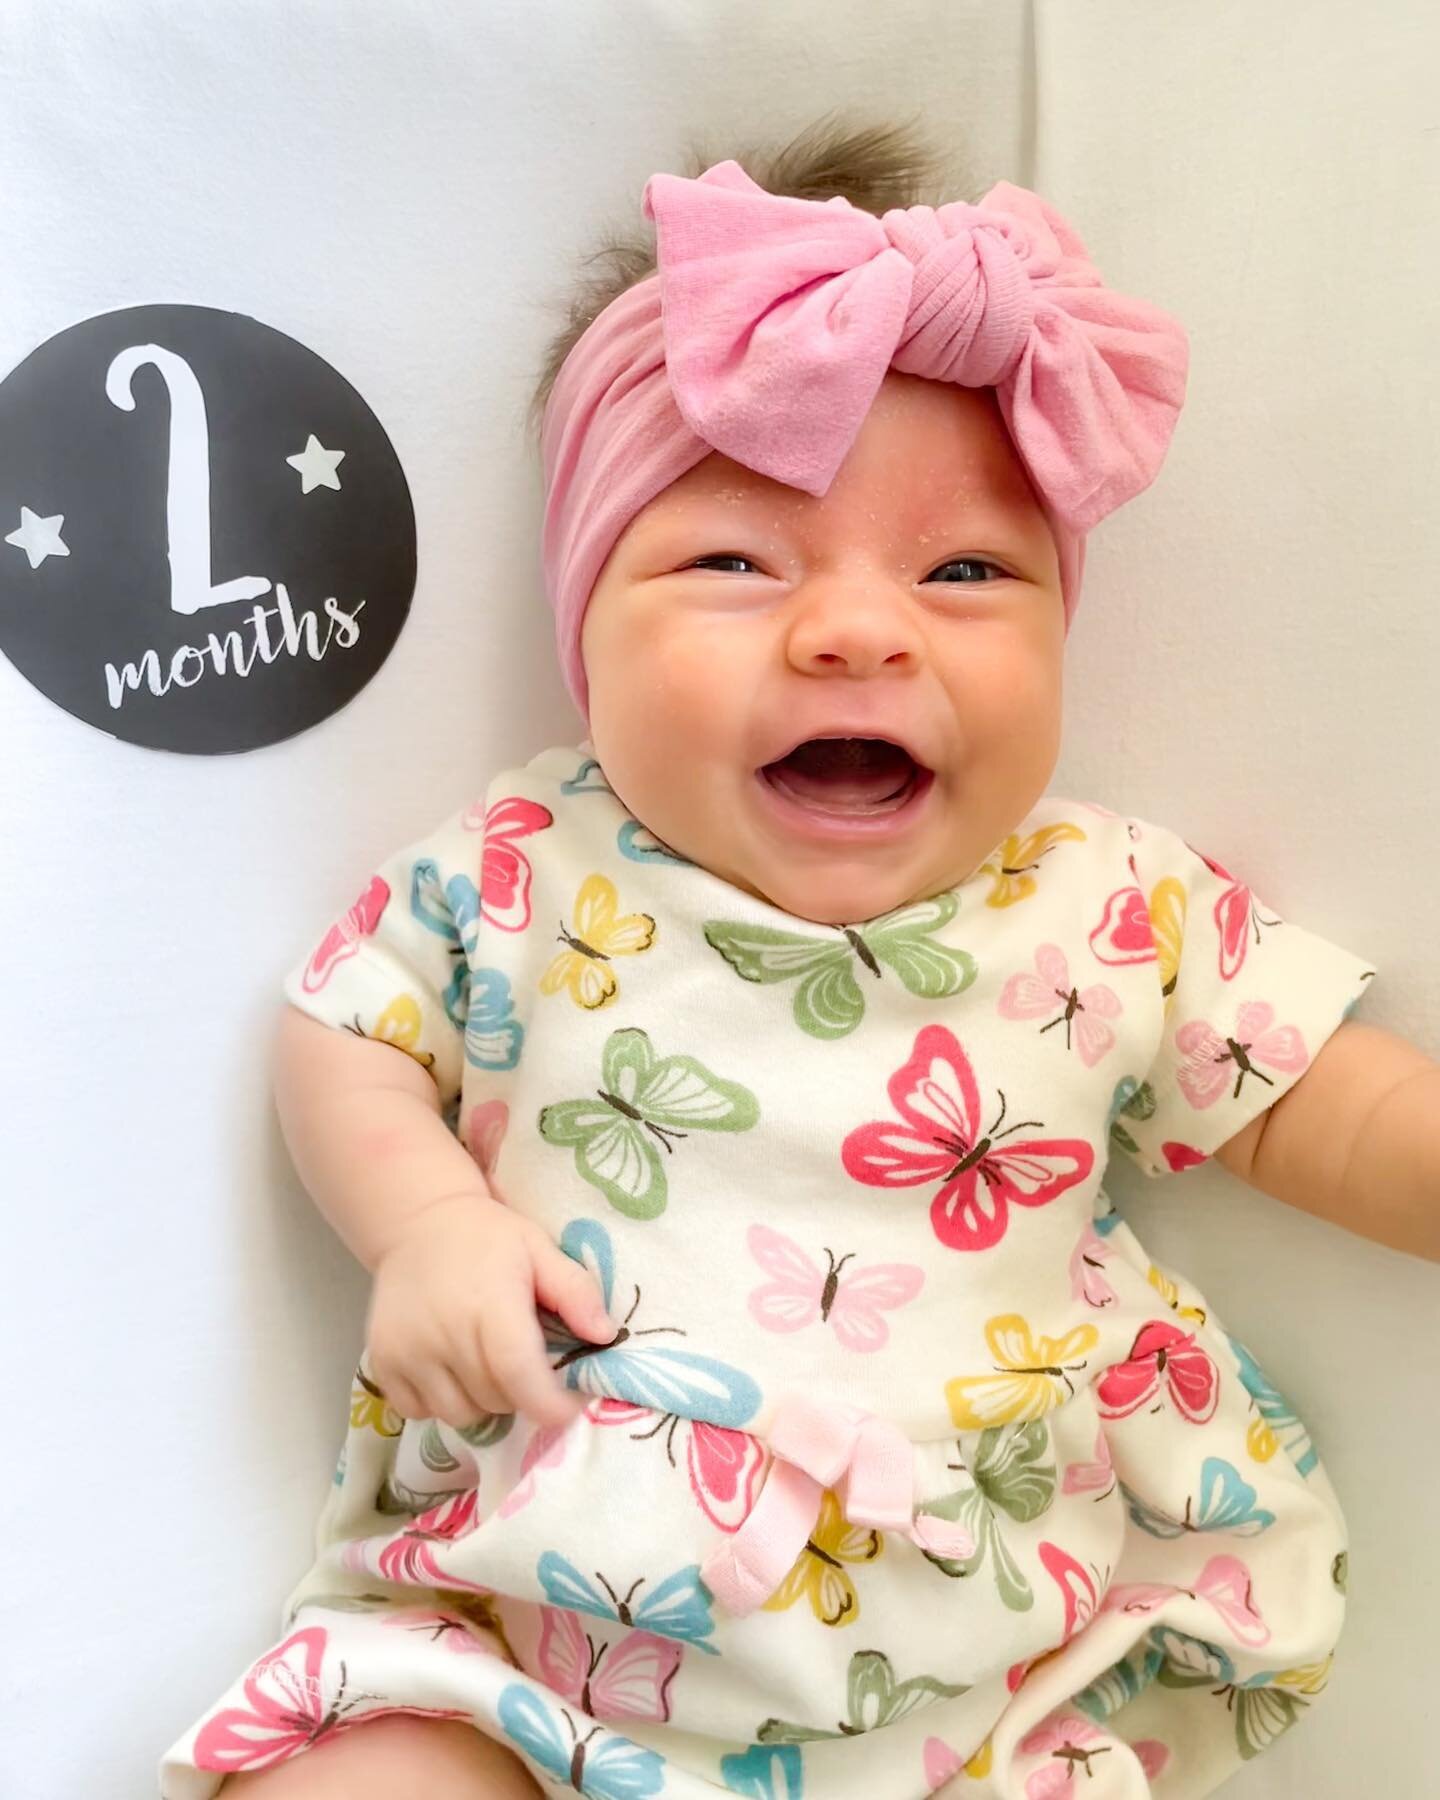 This happy little girl is two months today. Your smiles and laughs bring us so much joy. We love your new coos and babbling noises when you&rsquo;re excited about something. We are also so excited to experience our first holiday season with you 🎄🎁✨